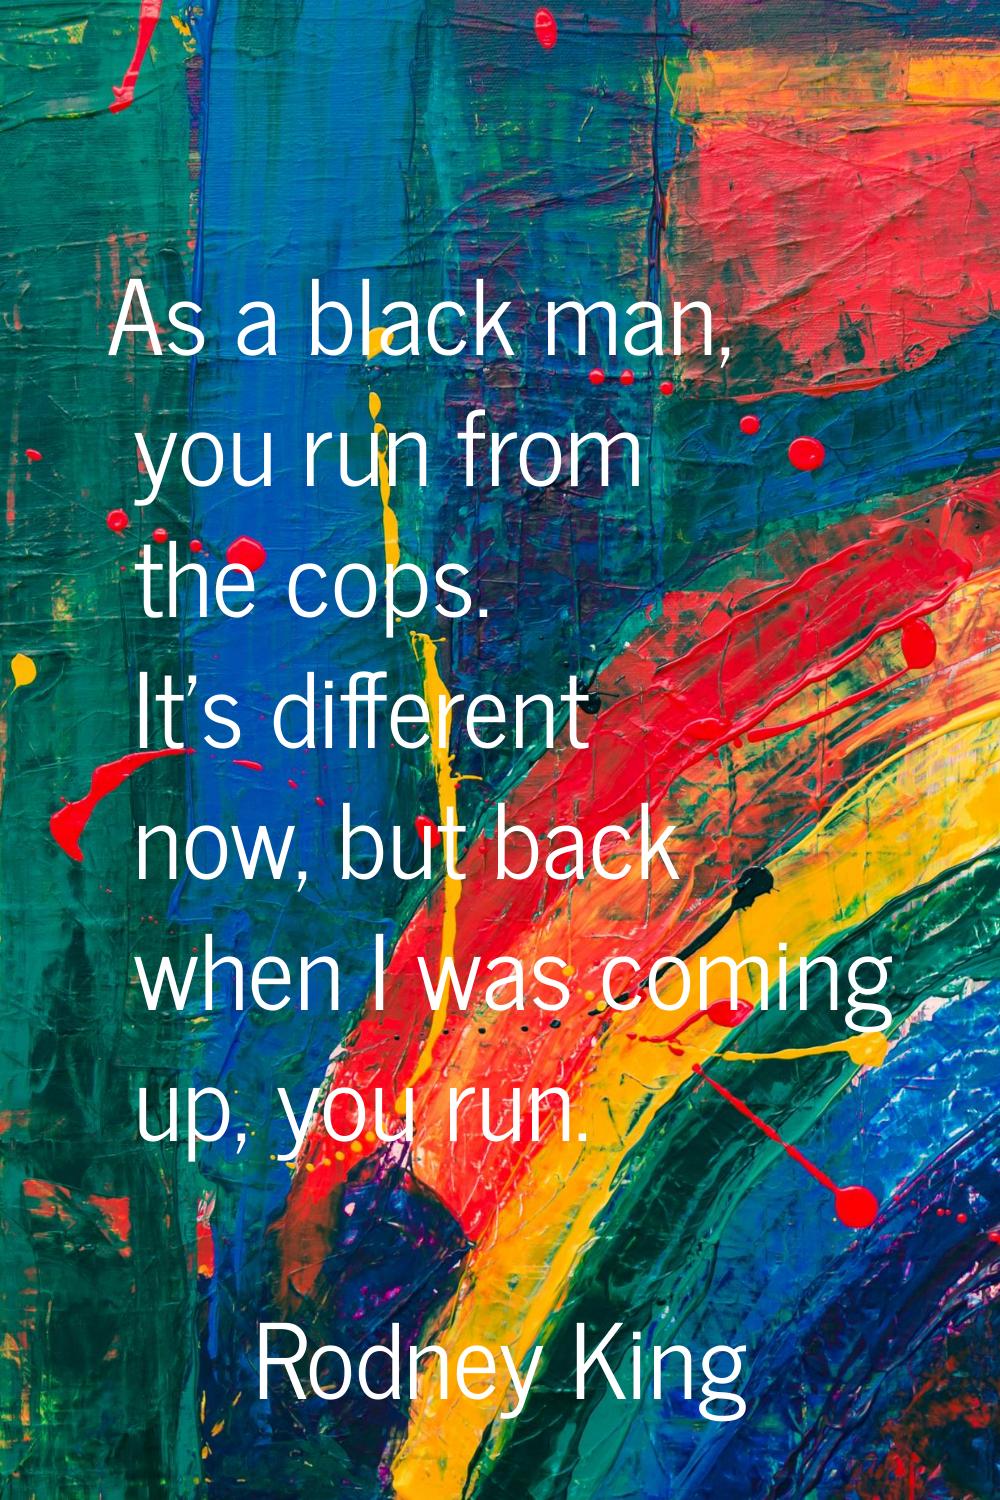 As a black man, you run from the cops. It's different now, but back when I was coming up, you run.